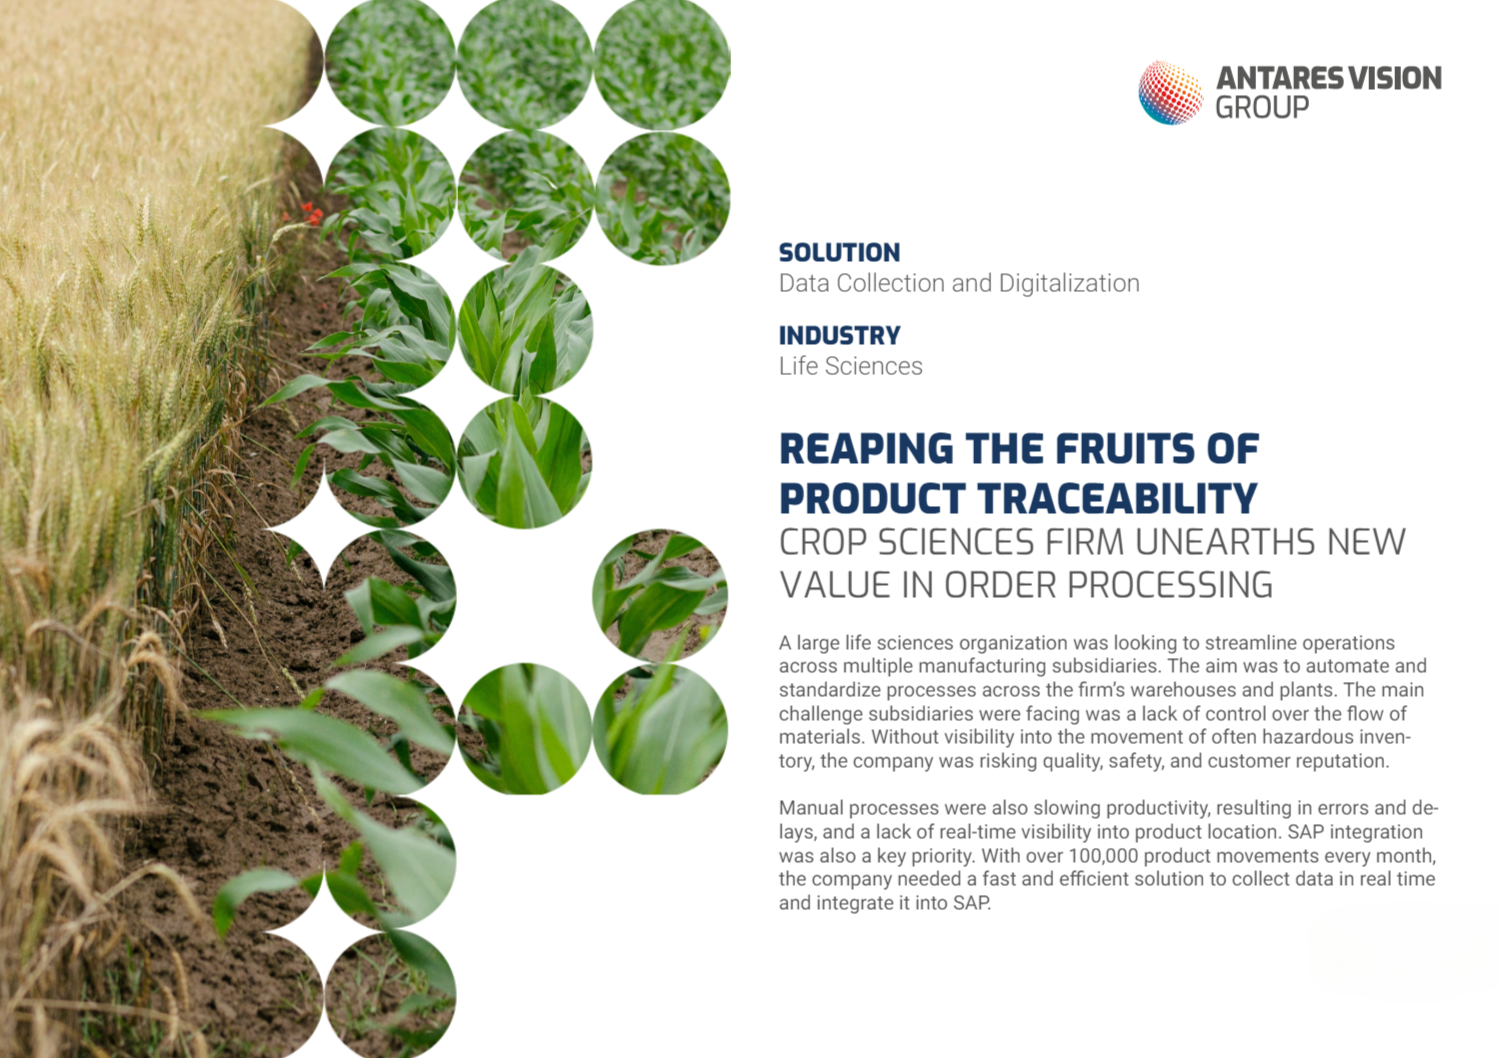 REAPING THE FRUITS OF PRODUCT TRACEABILITY